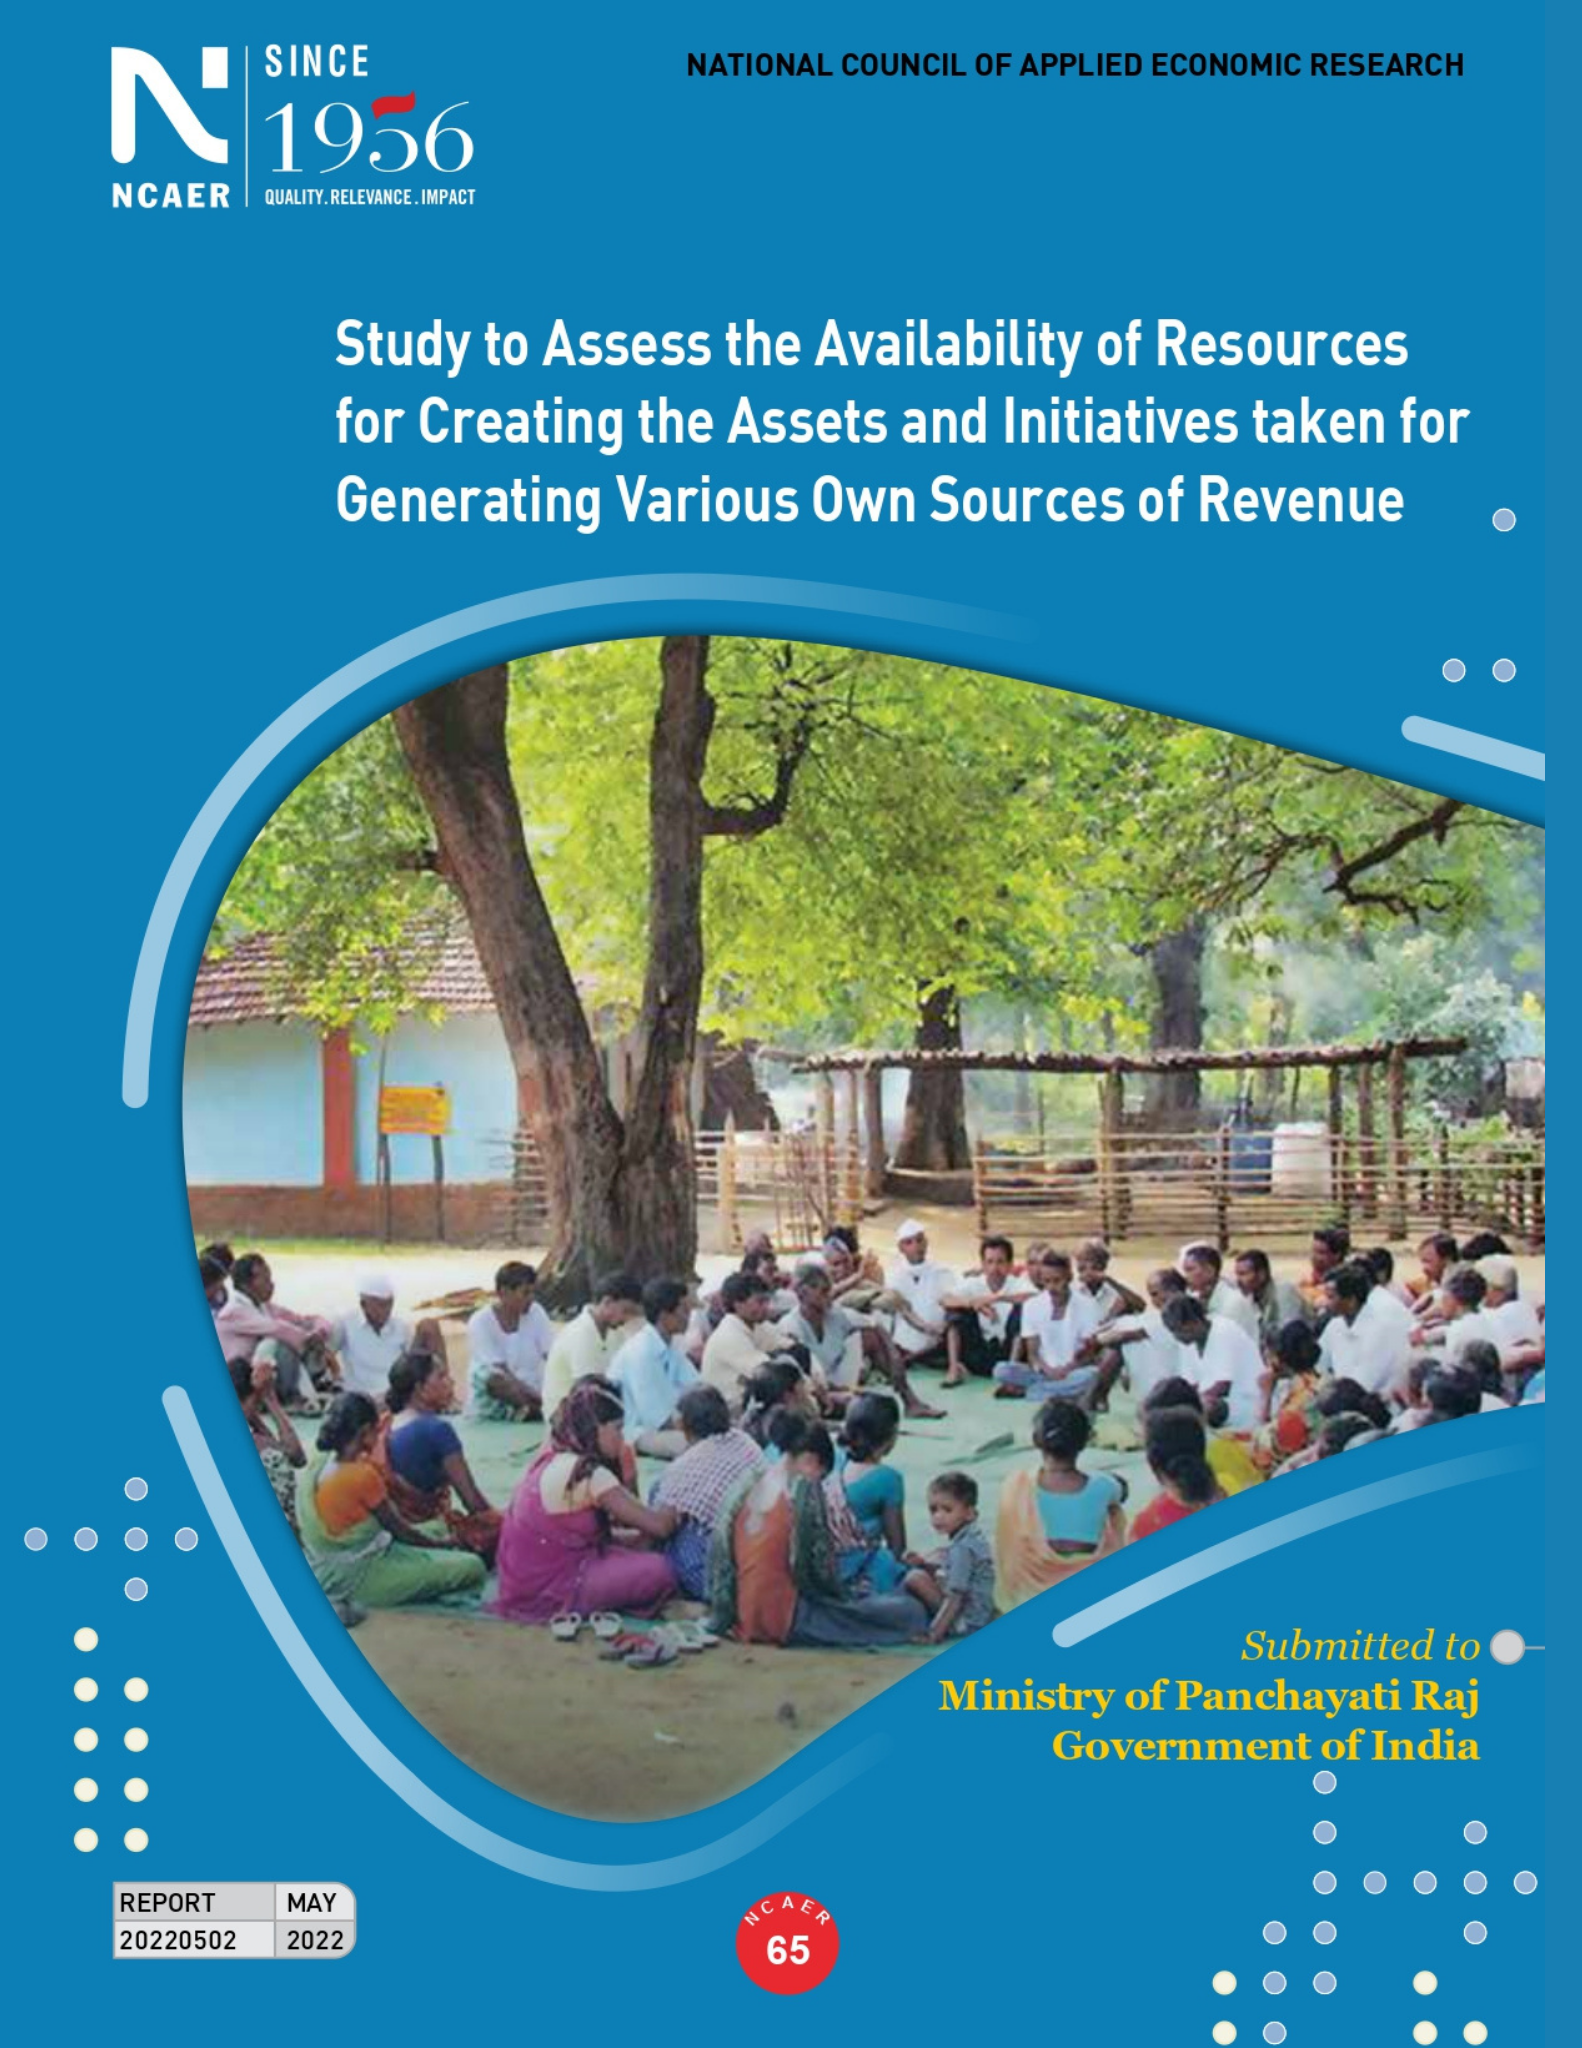 Study to Assess the Availability of Resources for Creating the Assets and Initiatives taken for Generating Various Own Sources of Revenue